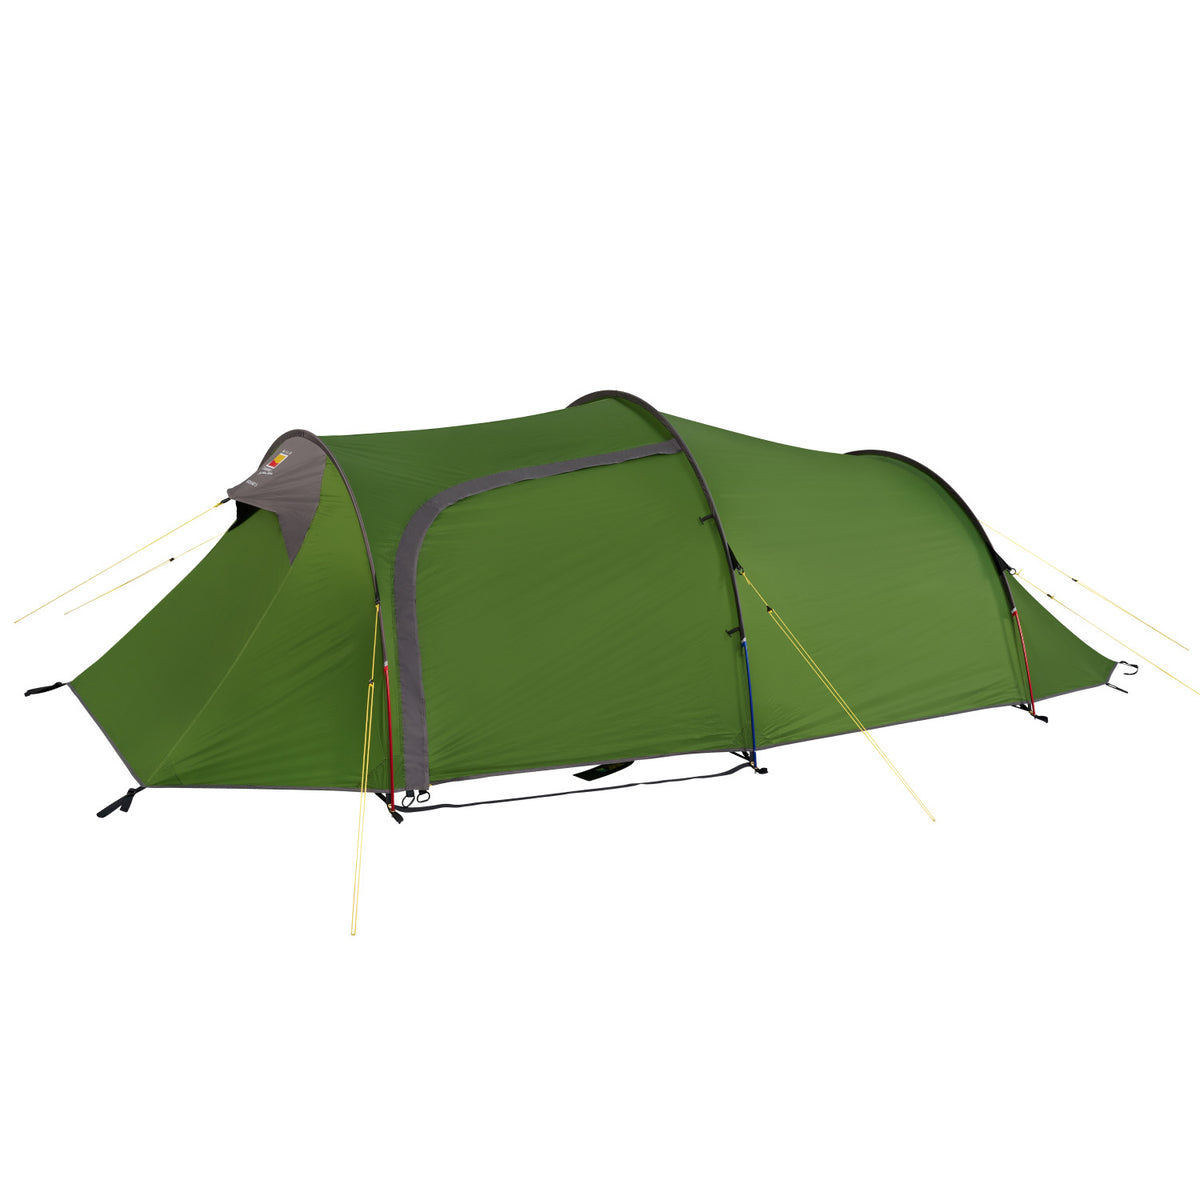 Wild Country Blizzard Compact 3 Three Person Tent - Green